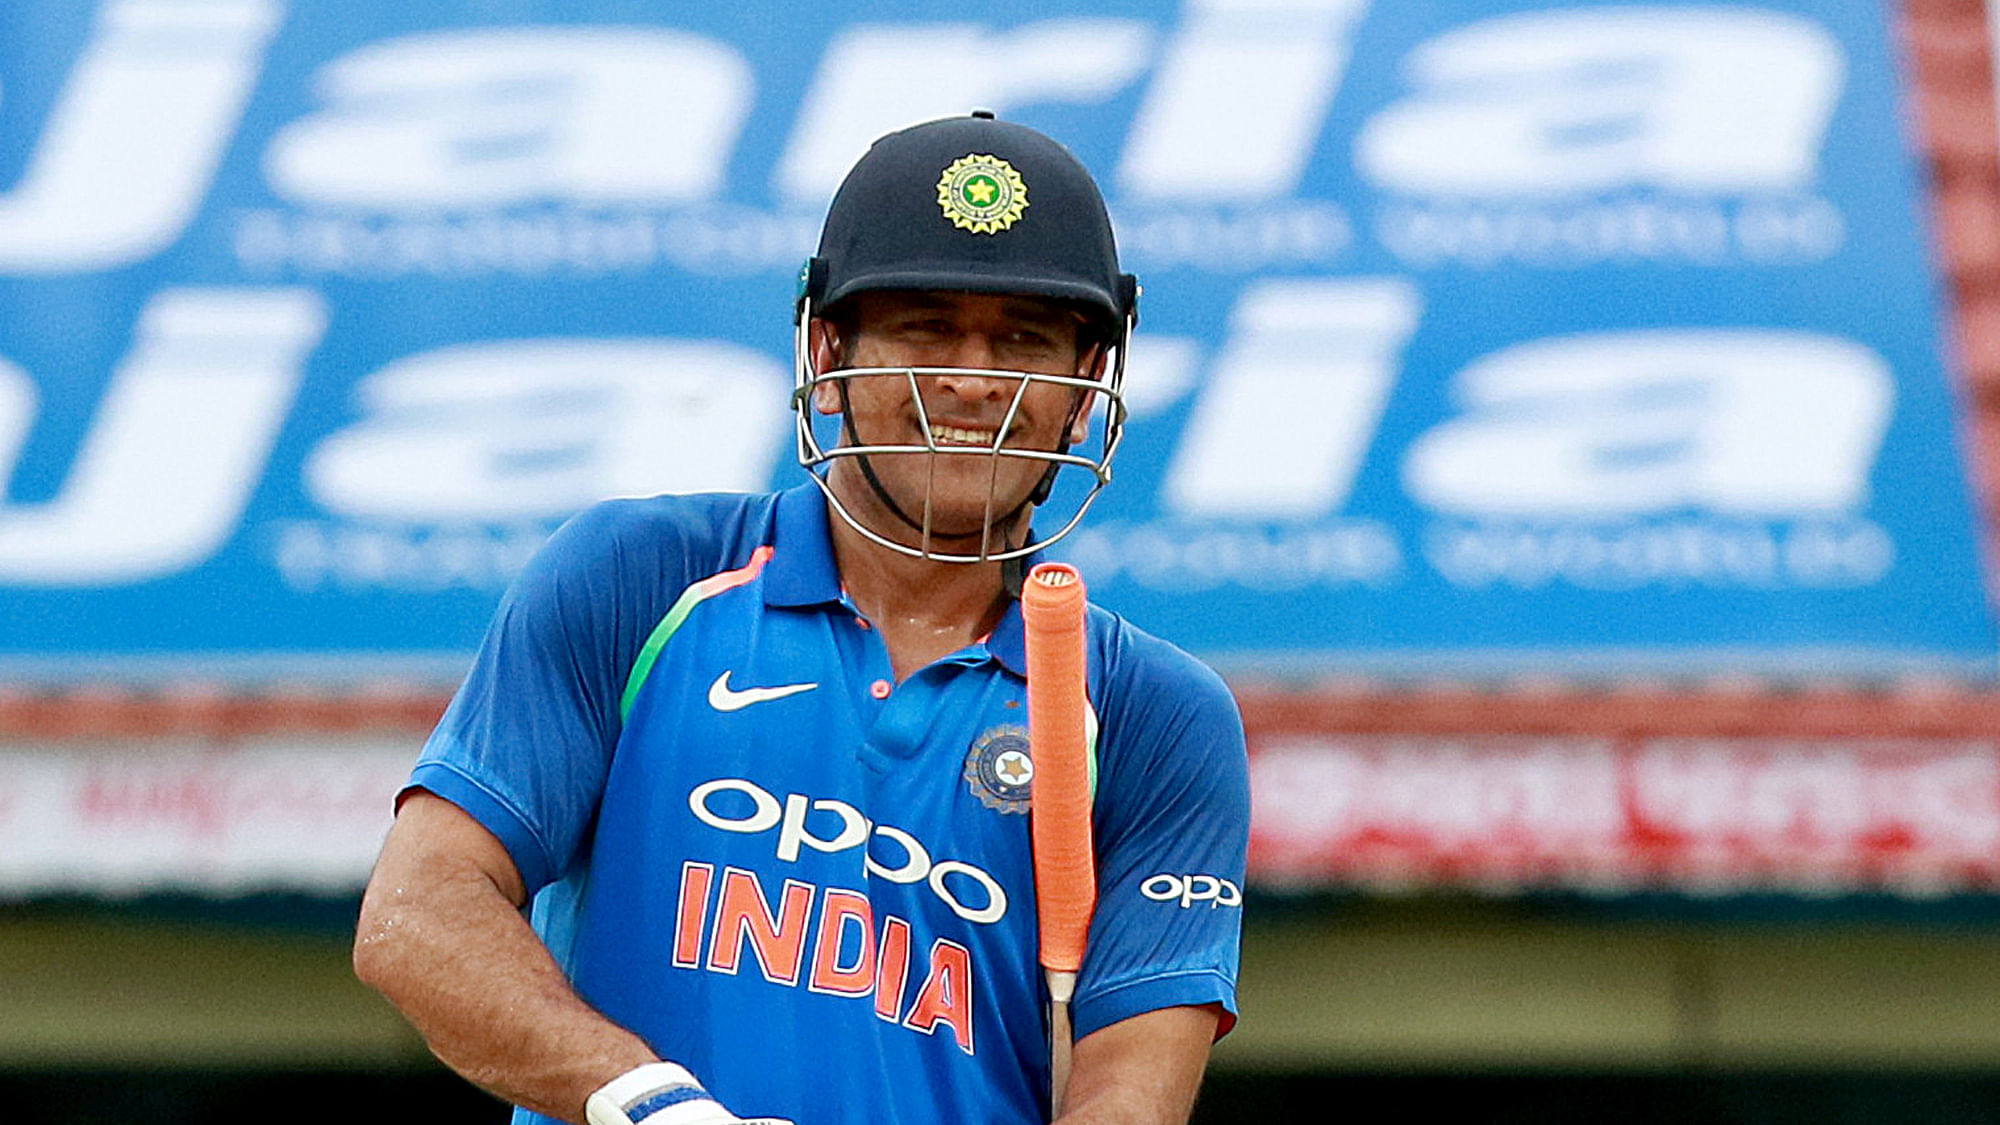 MS Dhoni scored his career’s 100th half-century in Chennai on Sunday.